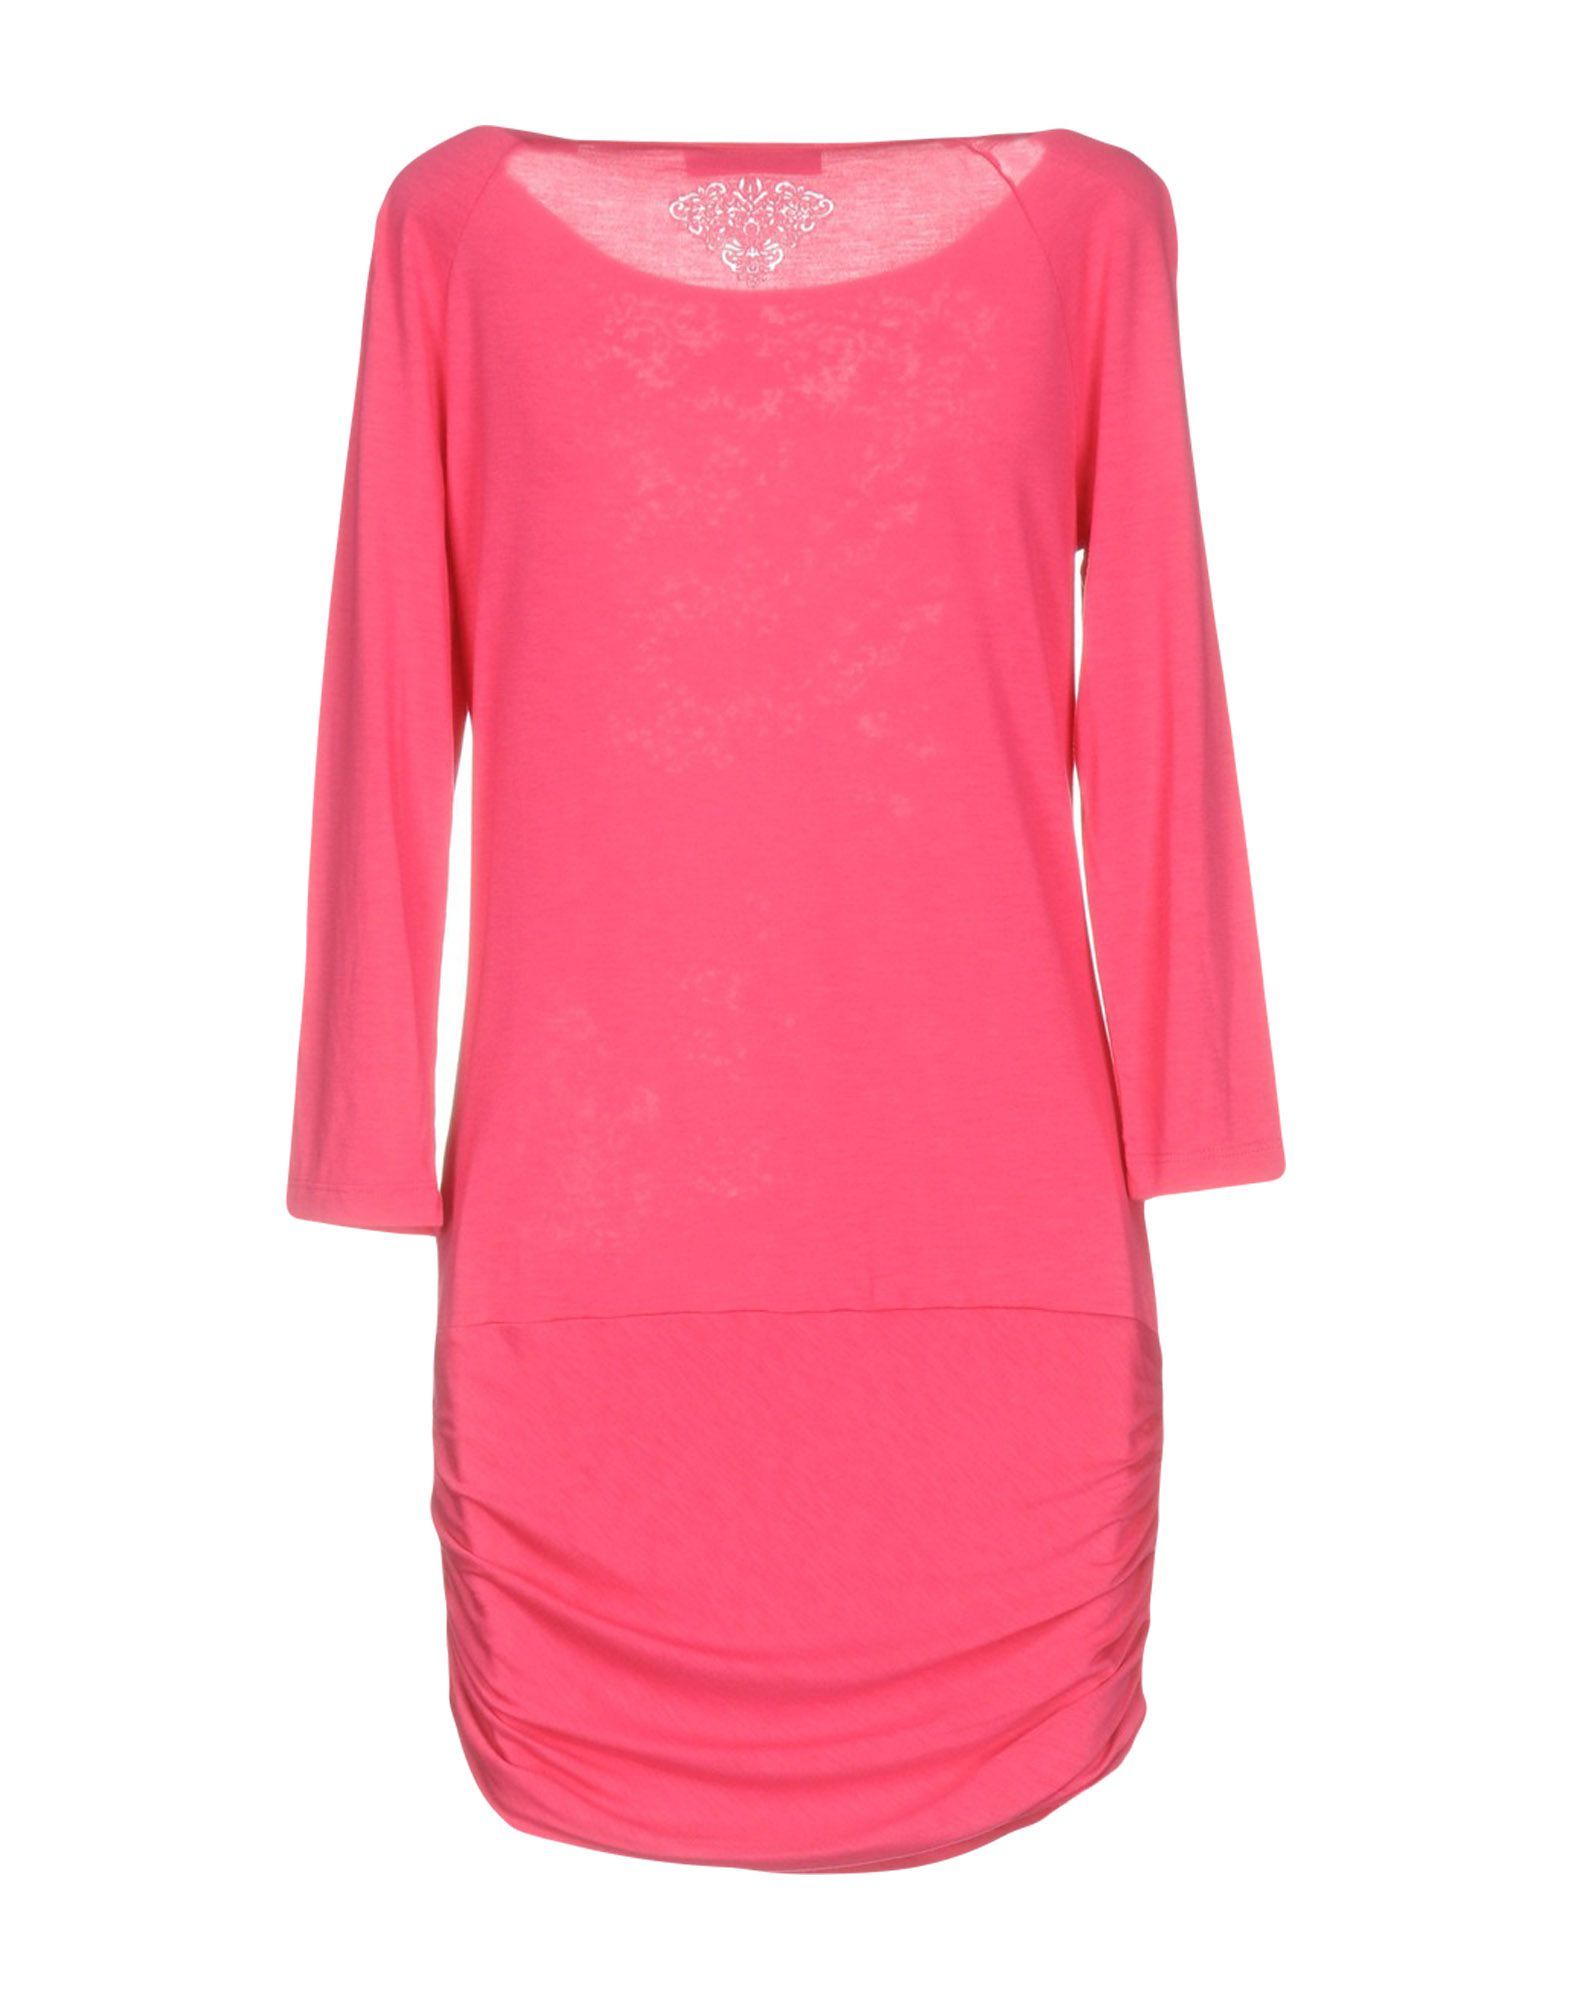 jersey, solid colour, wide neckline, long sleeves, draped detailing, no pockets, unlined, no fastening, tube dress